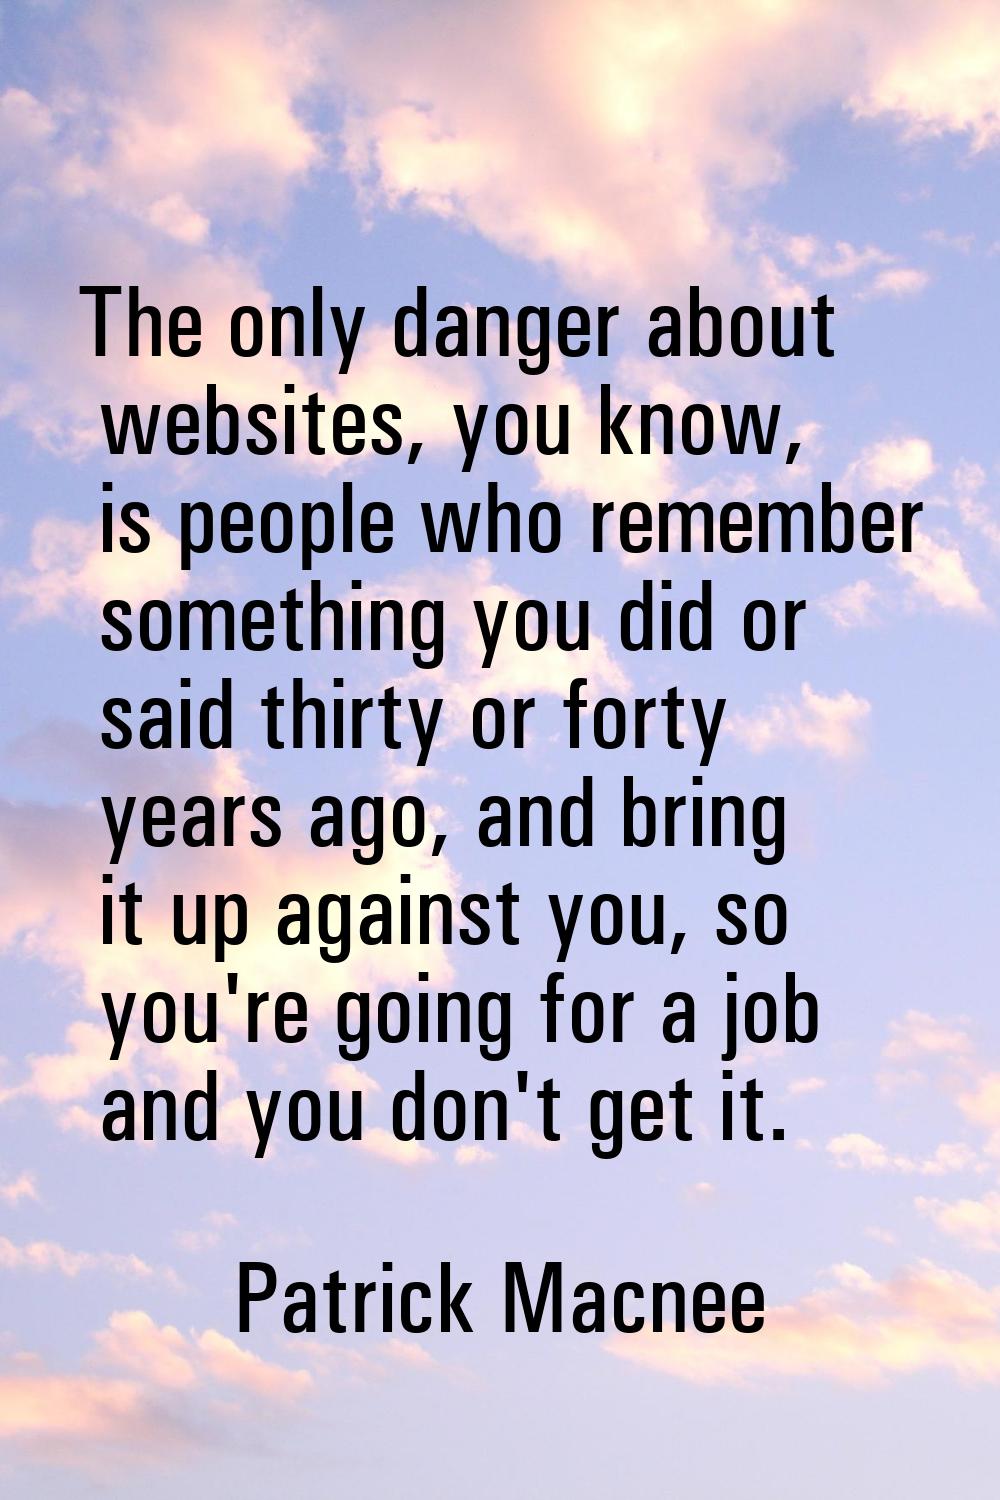 The only danger about websites, you know, is people who remember something you did or said thirty o